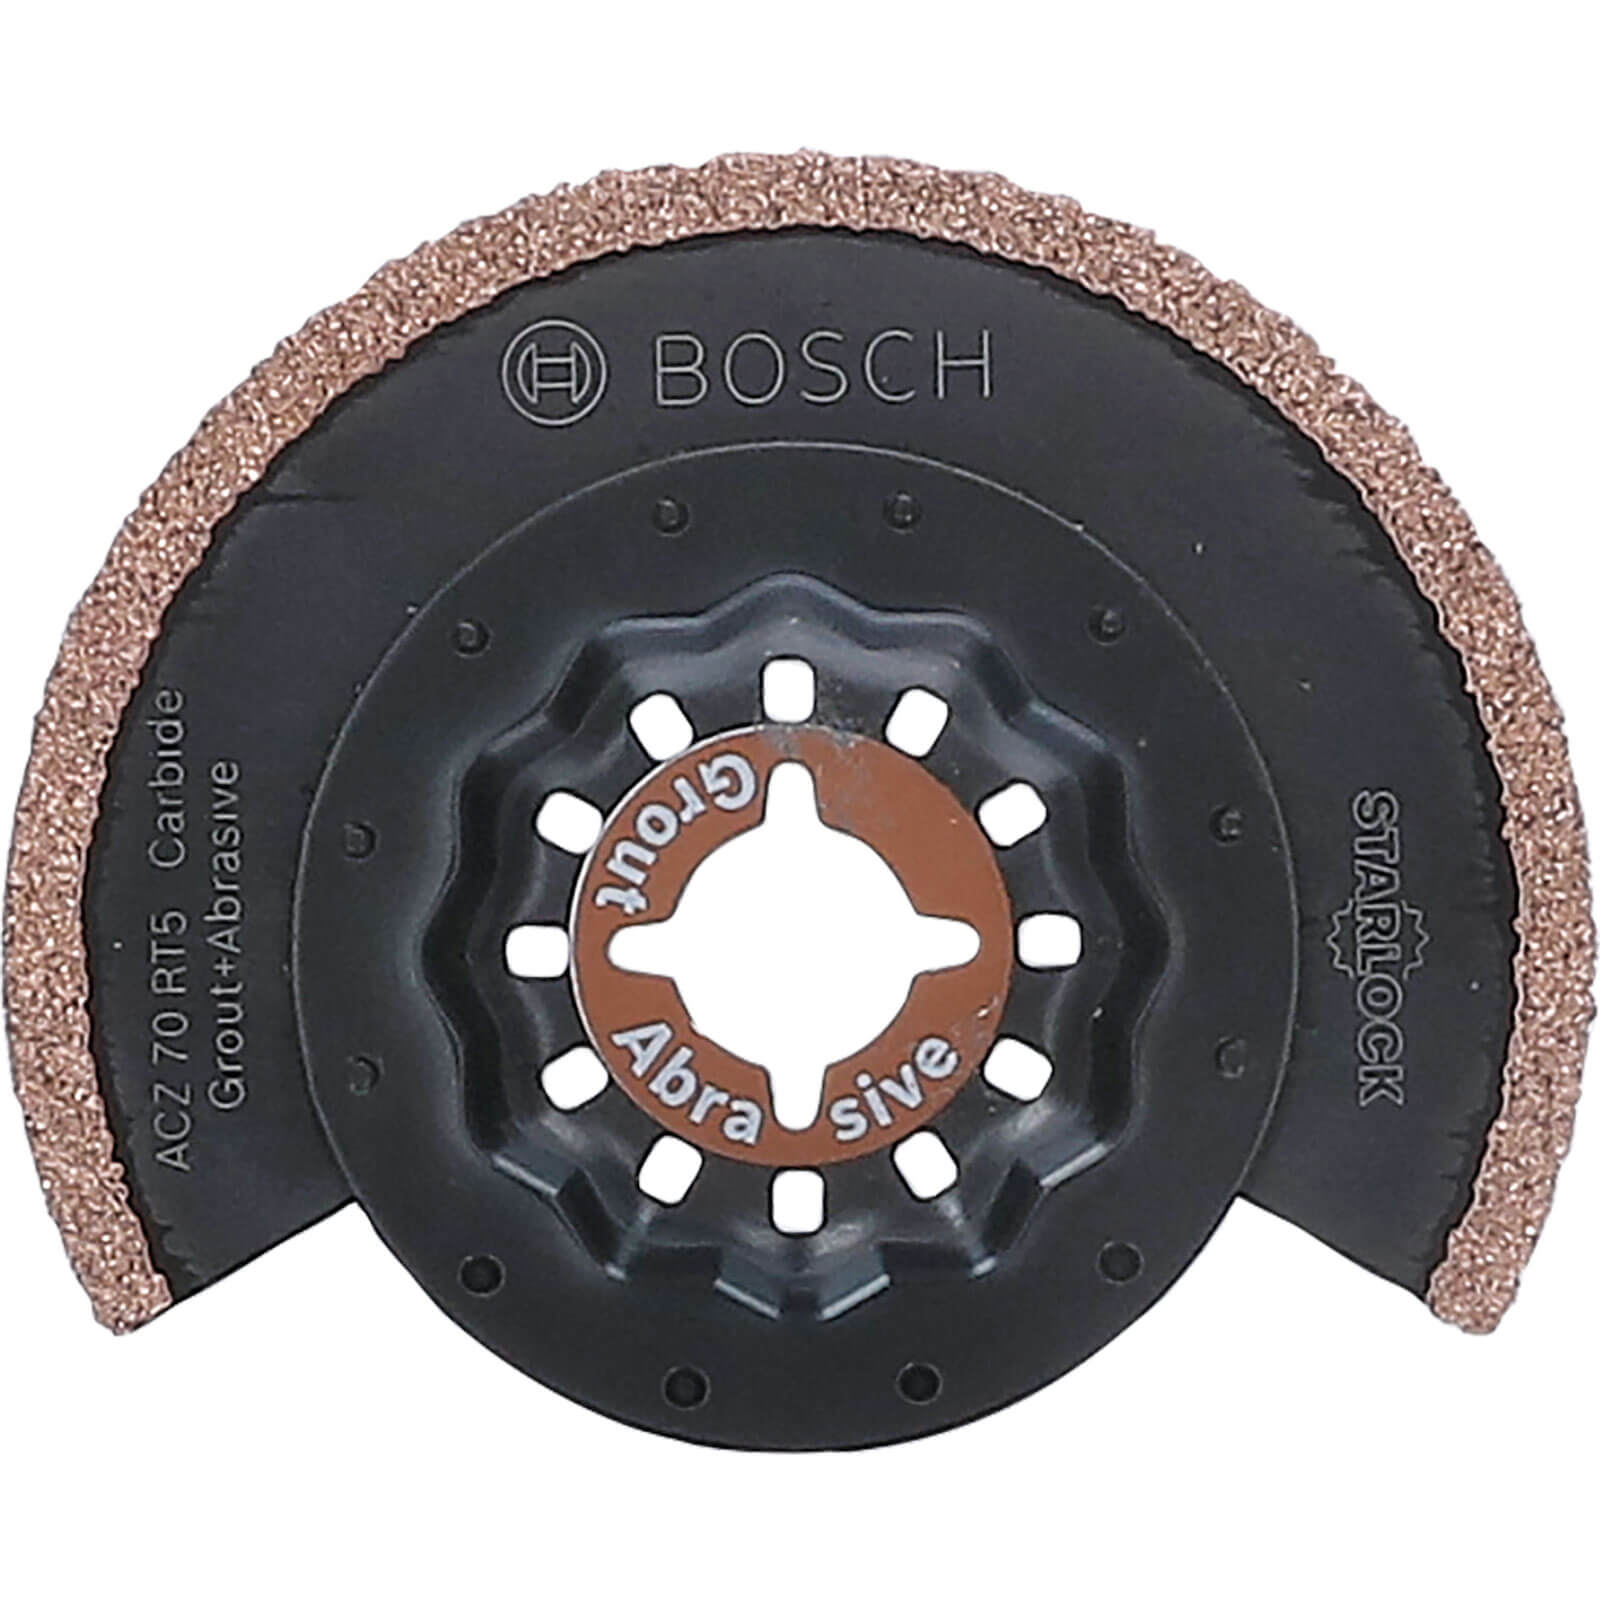 Image of Bosch ACZ 70 RT5 Thin Grout Oscillating Multi Tool Segment Saw Blade 70mm Pack of 10